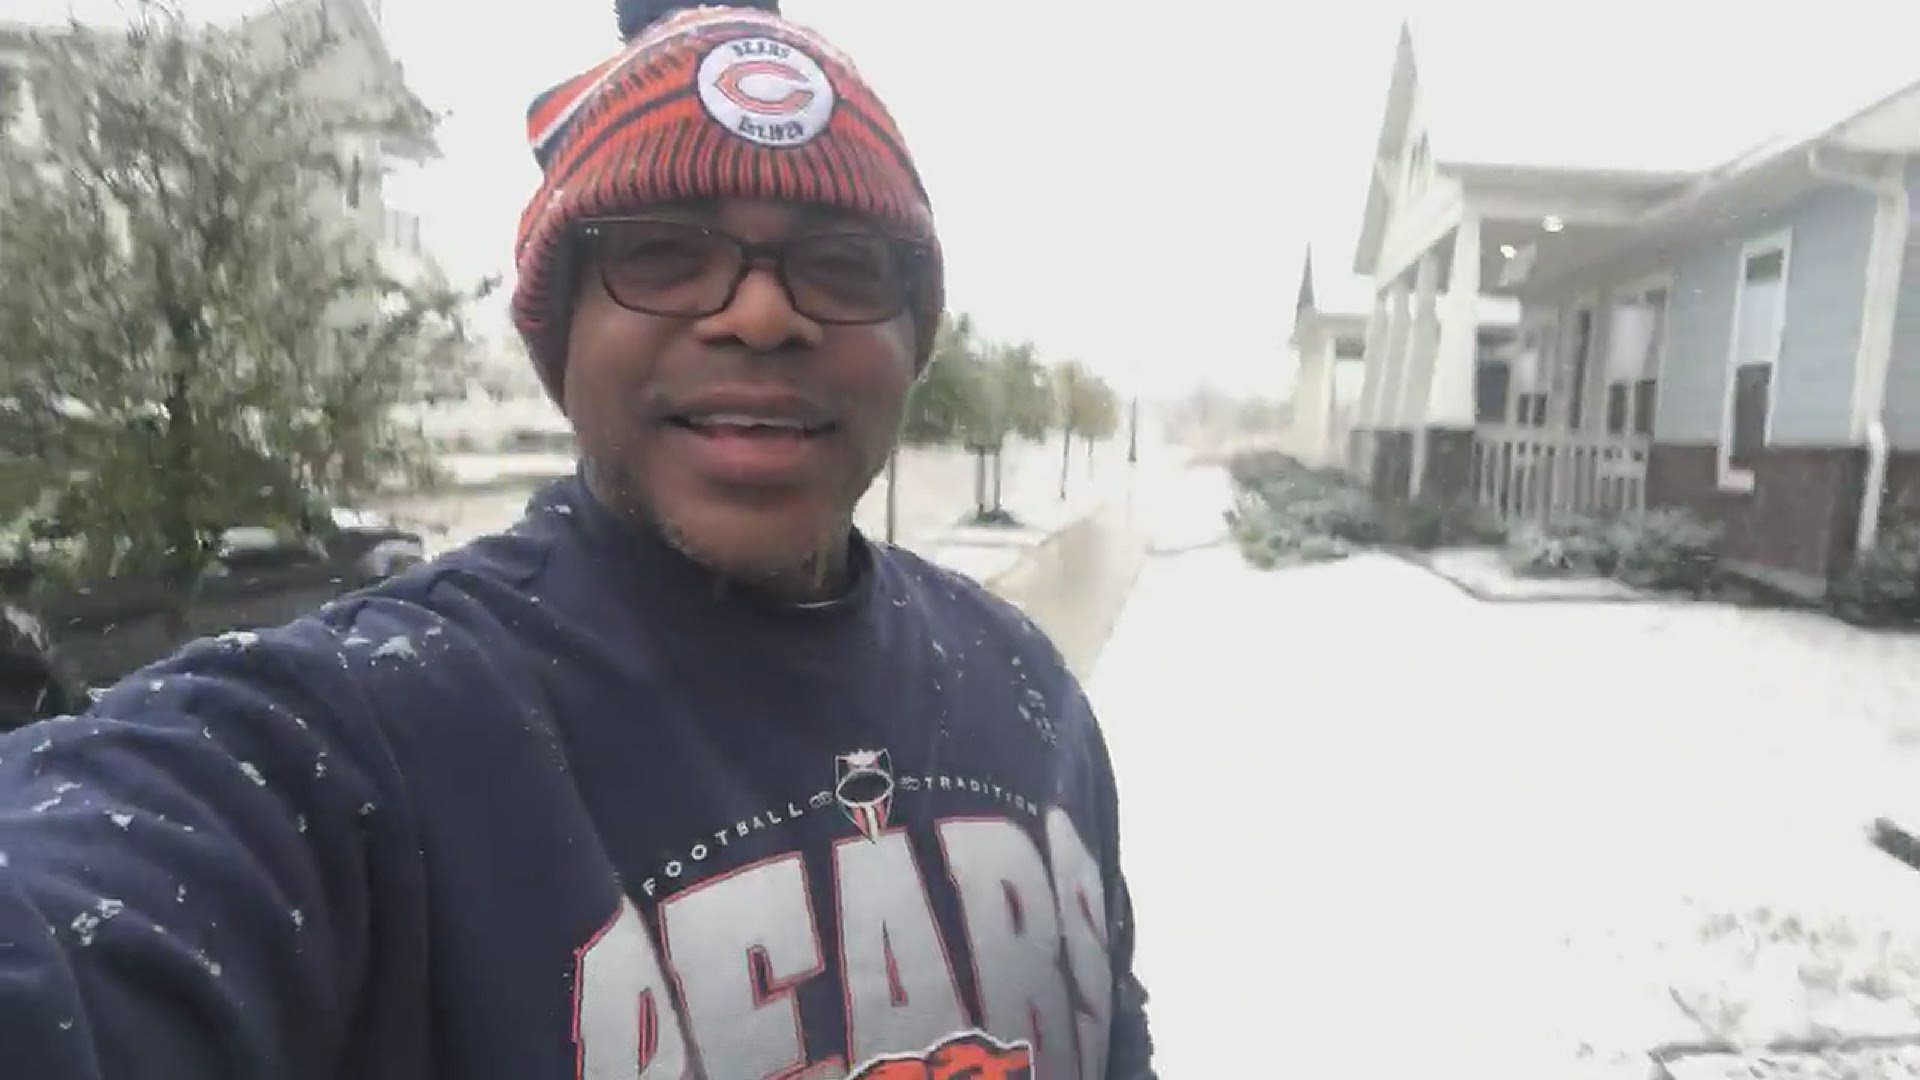 A Chicago Bear's fan says the snow is a good omen.
Credit: Jerry  Smith